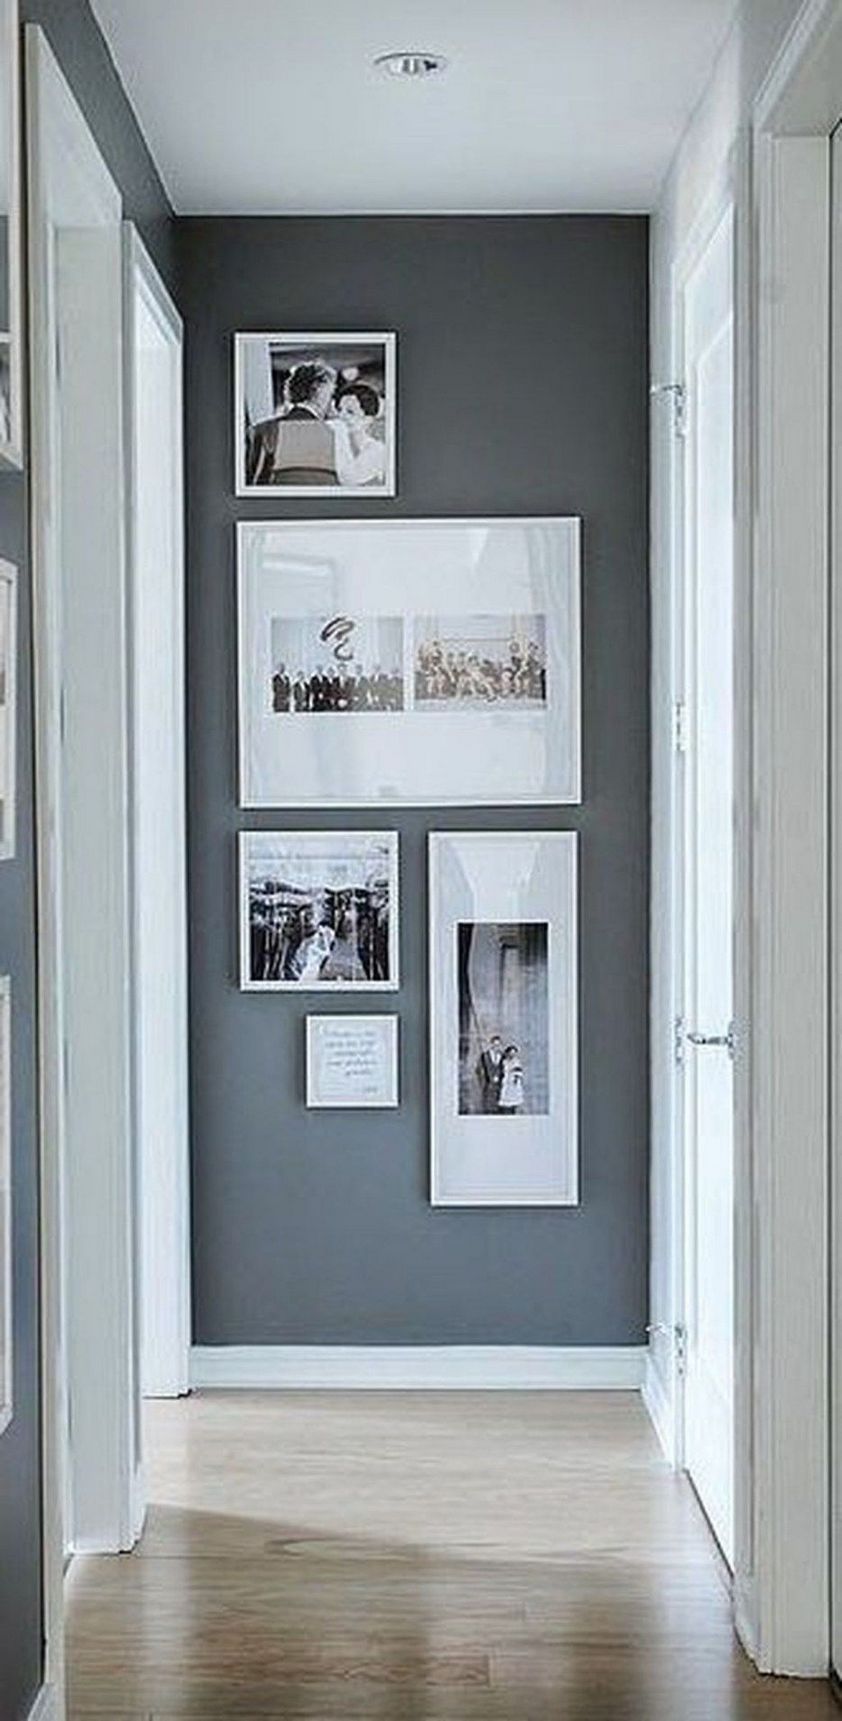 Gallery wall decor ideas to show sweet memory 30 – Savvy Ways About Things Can Teach Us